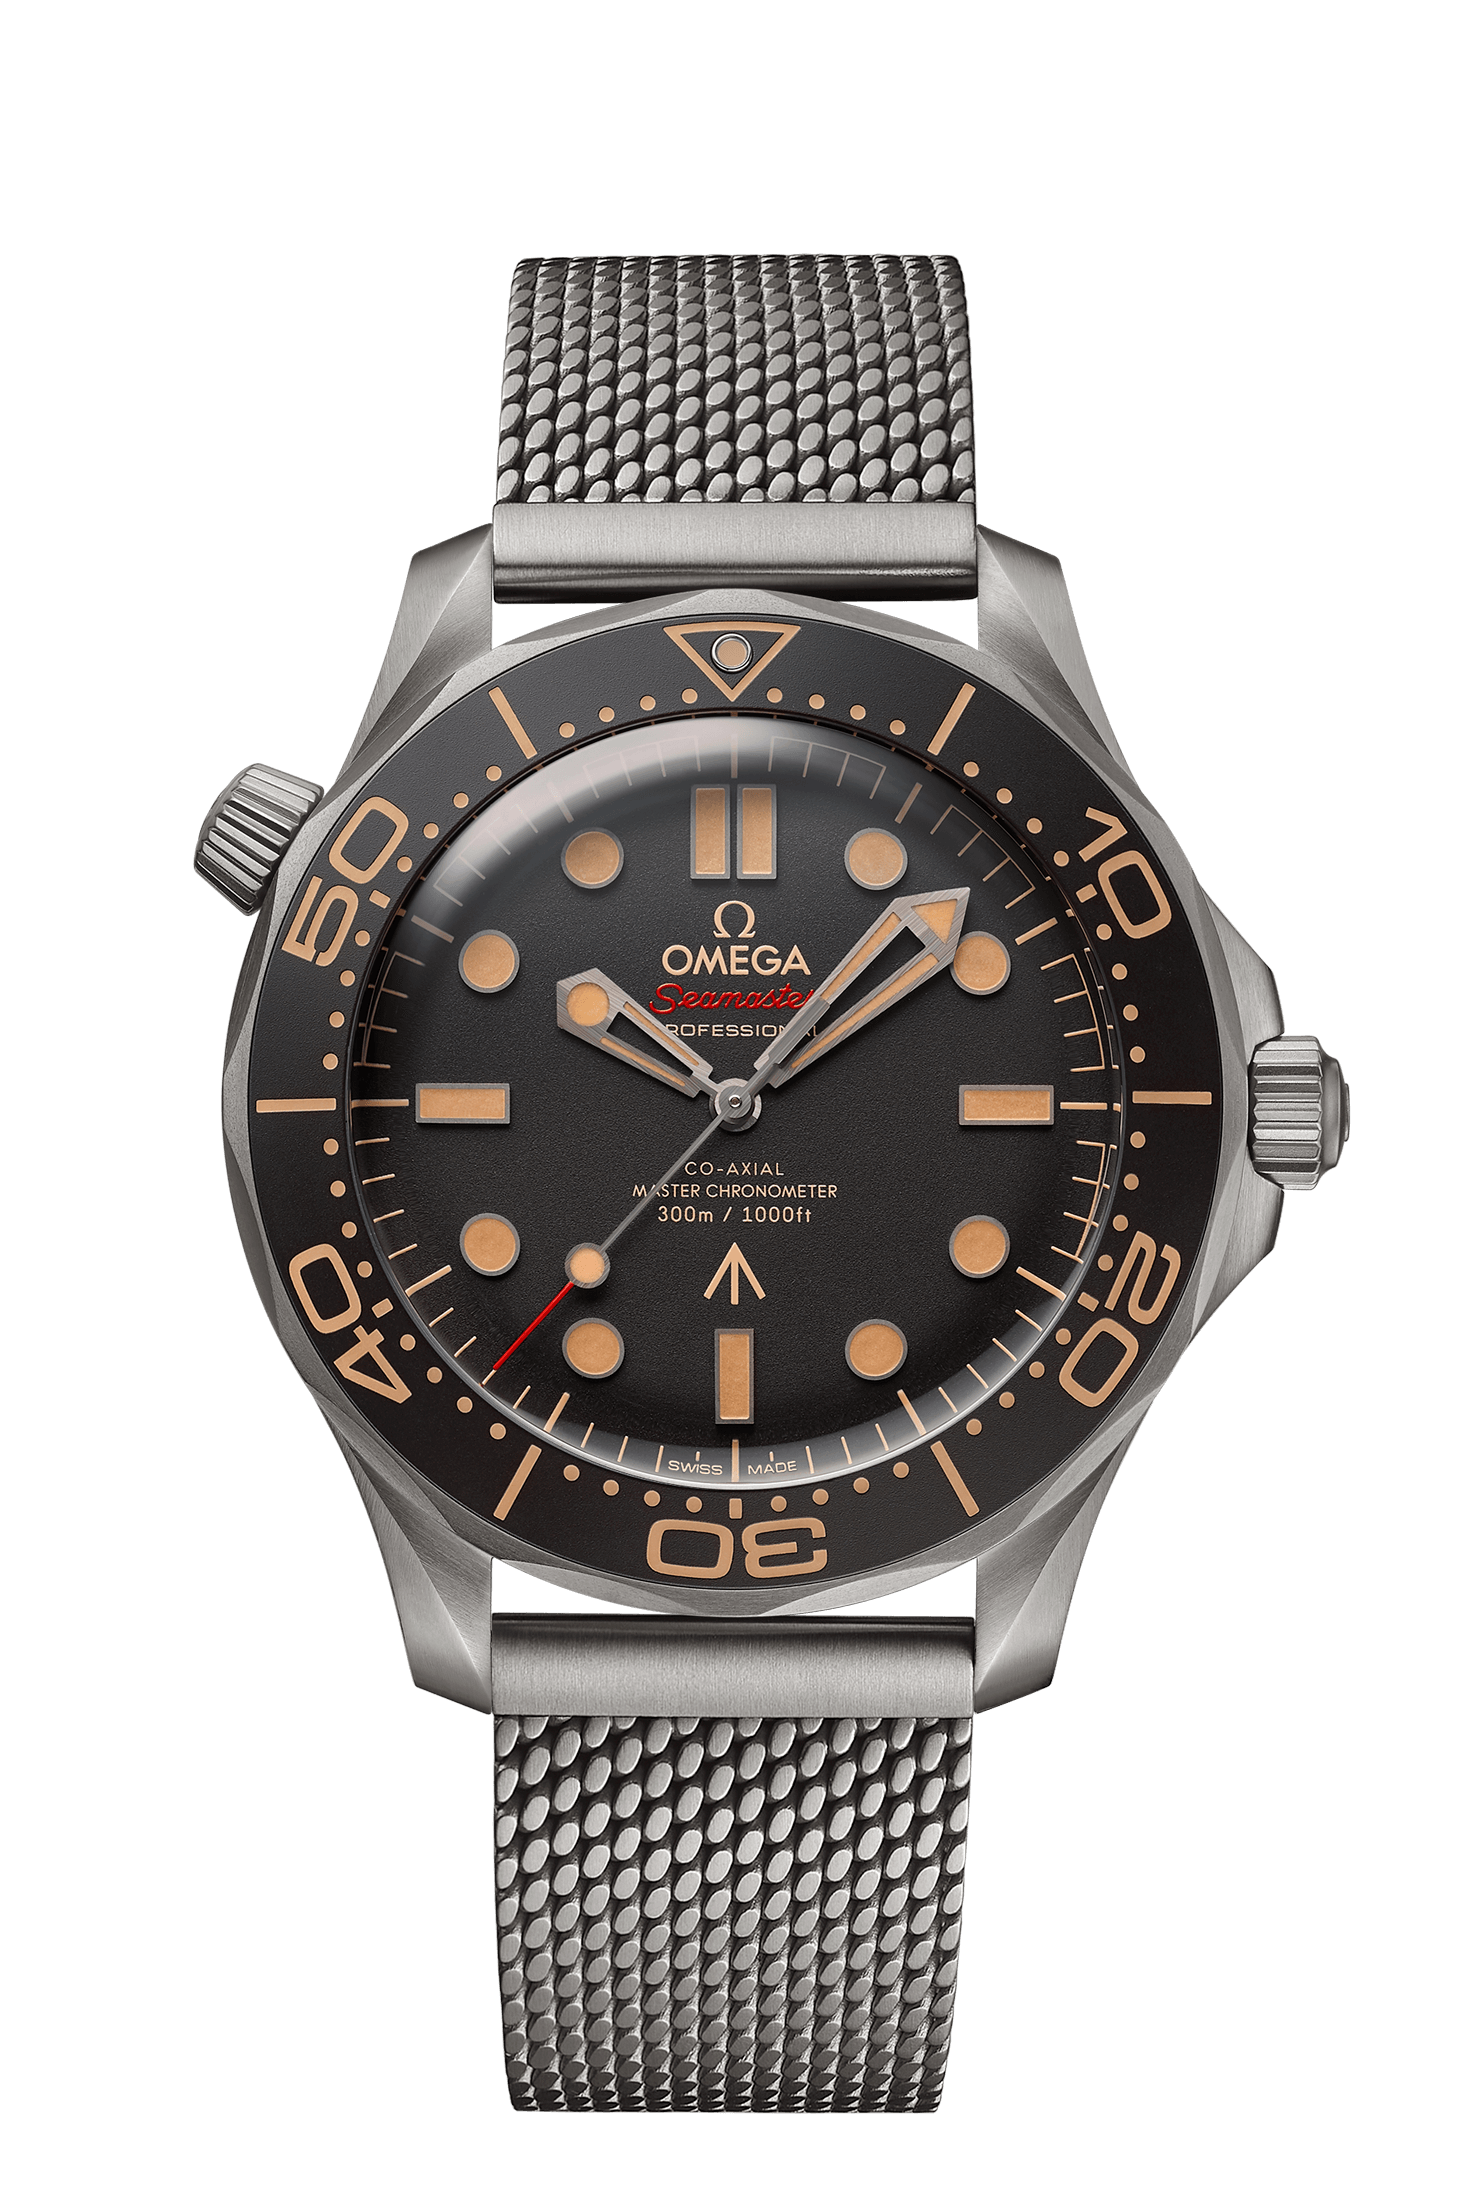 Omega 300m "No Time To Die" Titanium 210.90.42.20.01.001 007 Edition